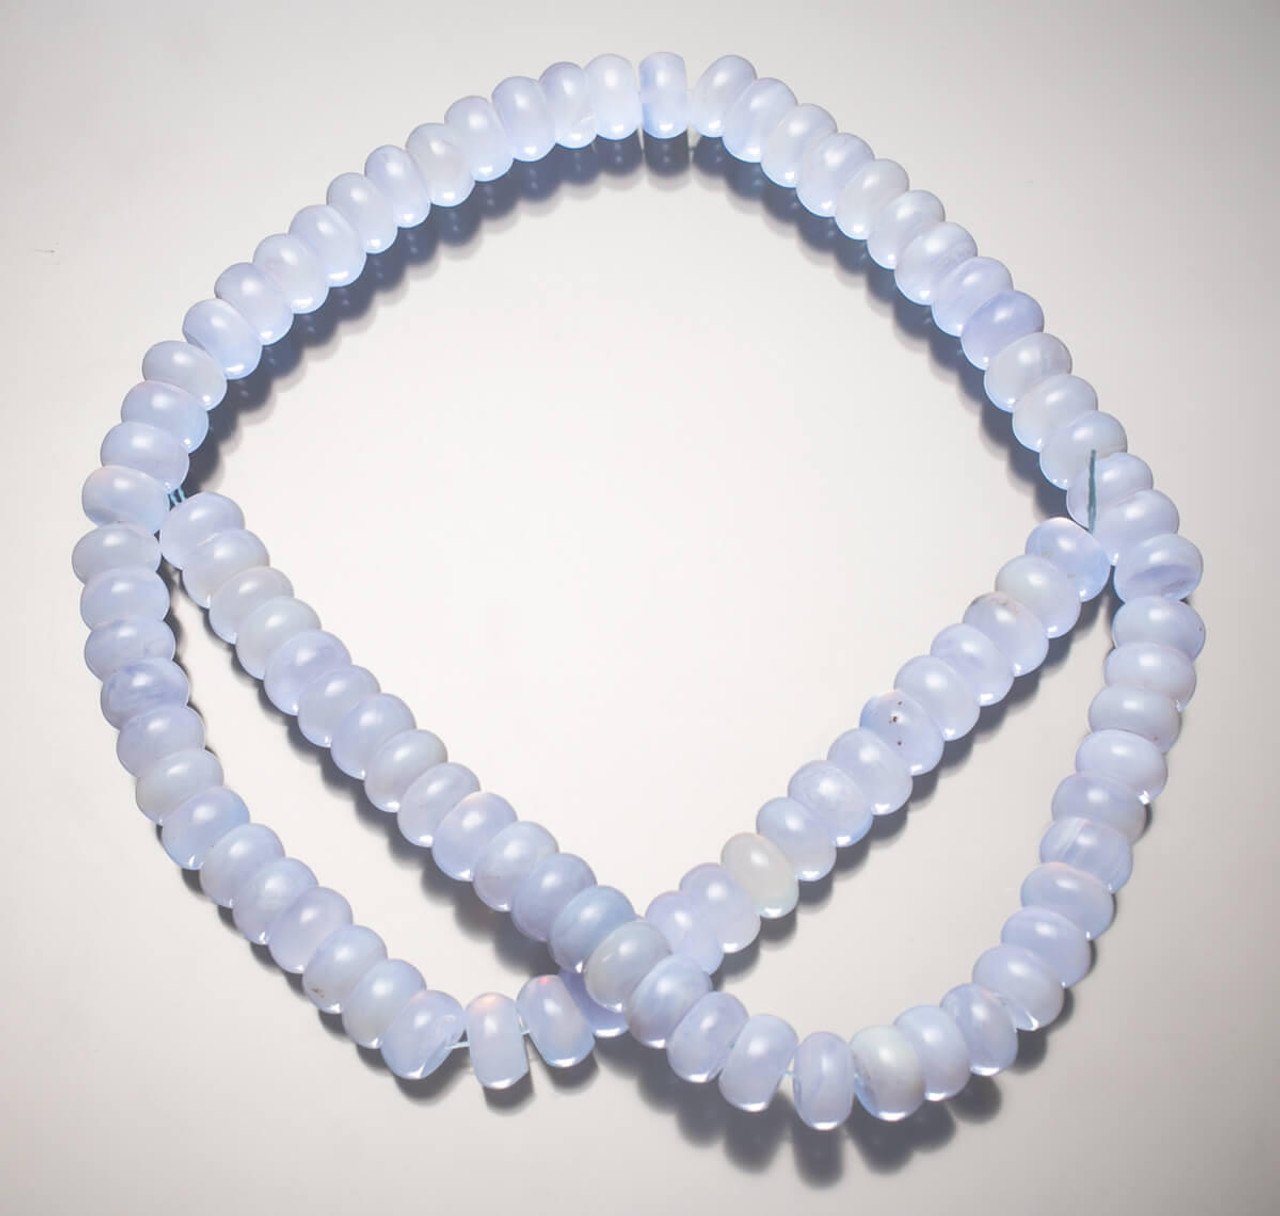 Beads Blue Chalcedony(Malawi,Africa)8mm Rondell BC8d 